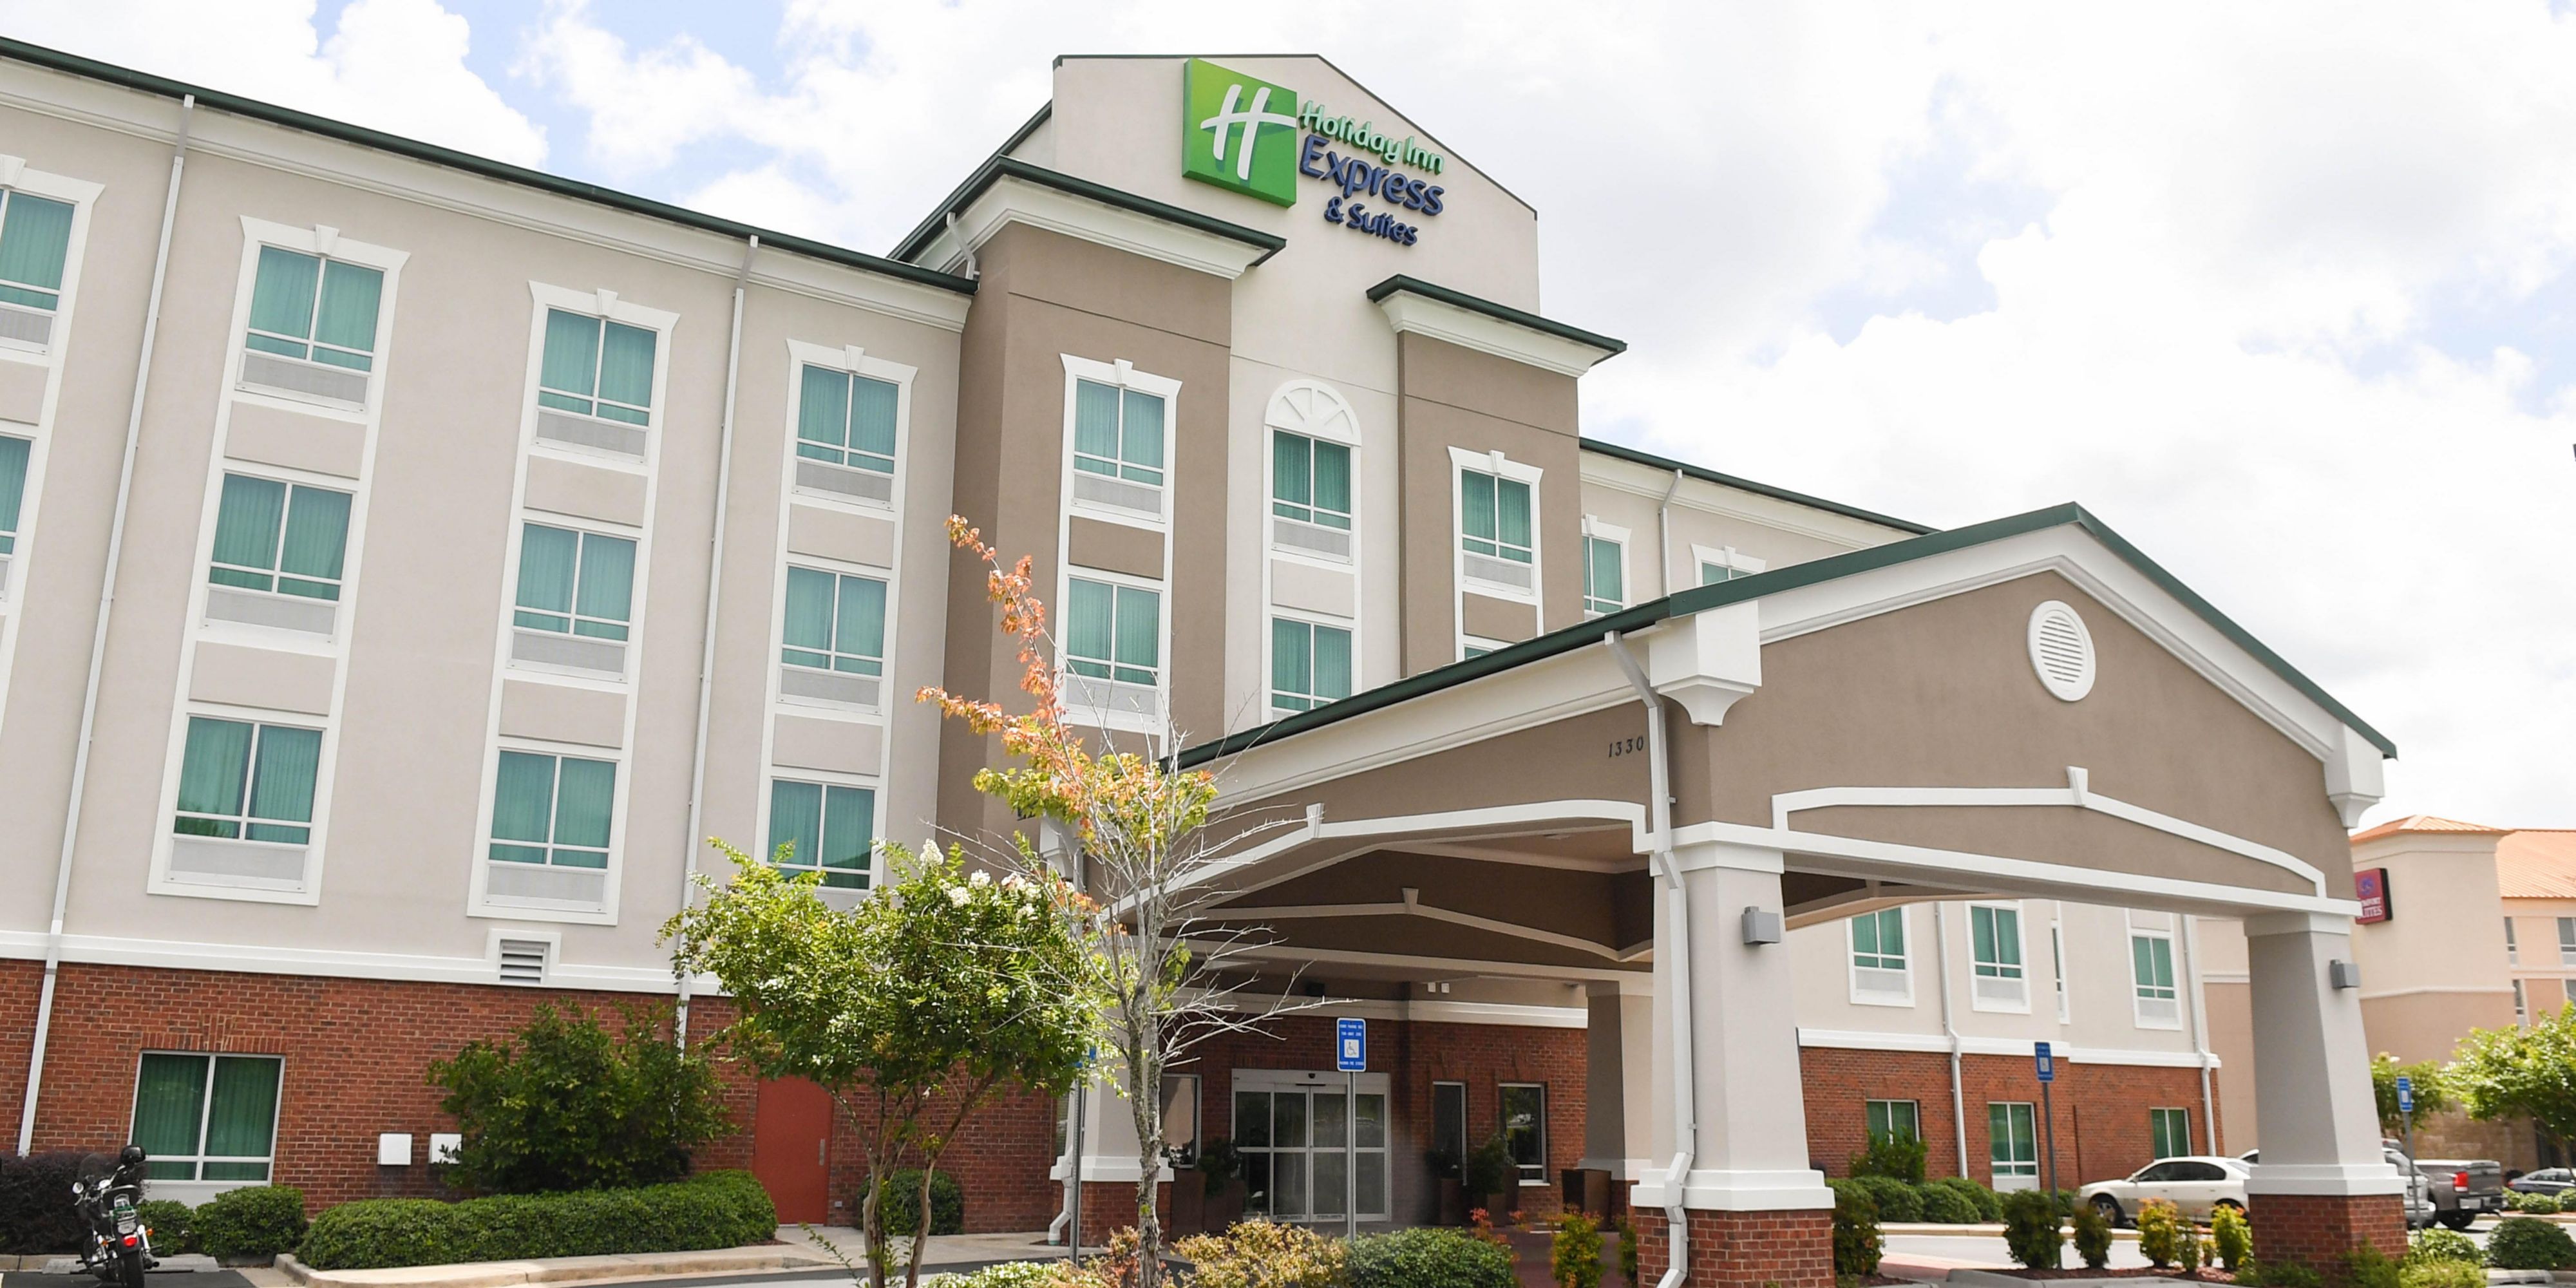 When visiting Valdosta, our hotel is in an ideal location for you. We are located off I-75 at Exit 18. Our hotel is located within walking distance to 12+ shops and restaurants and within a 5-minute drive to 40+ shops and restaurants.